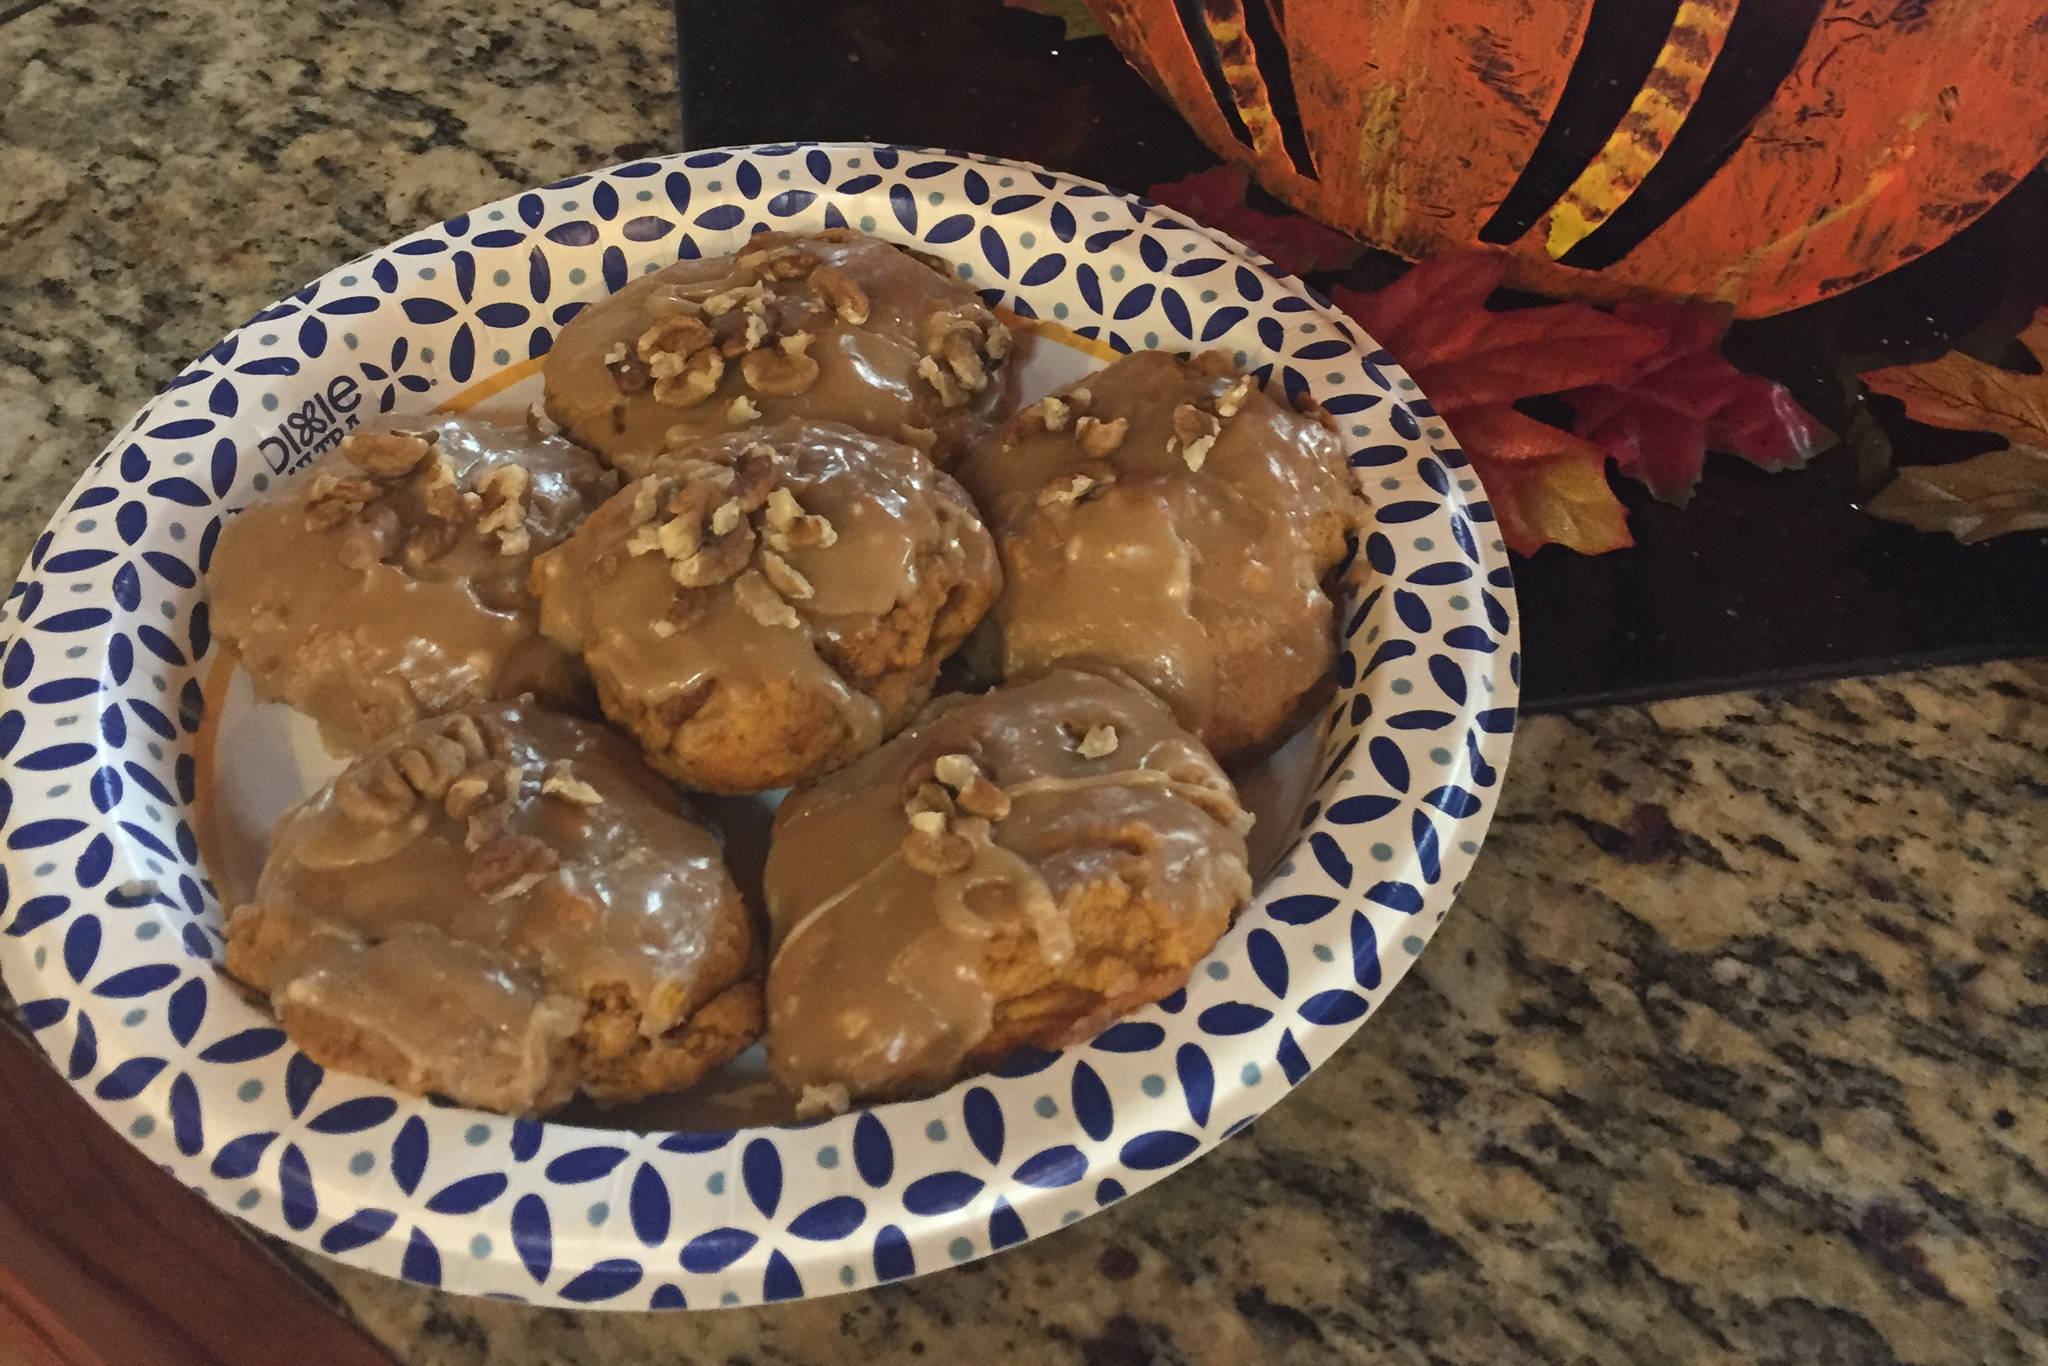 These pumpkin cookies baked by Teri Robl on Oct. 28, 2018, in her Homer, Alaska, kitchen are just the thing for a fall Halloween treat. (Photo by Teri Robl)